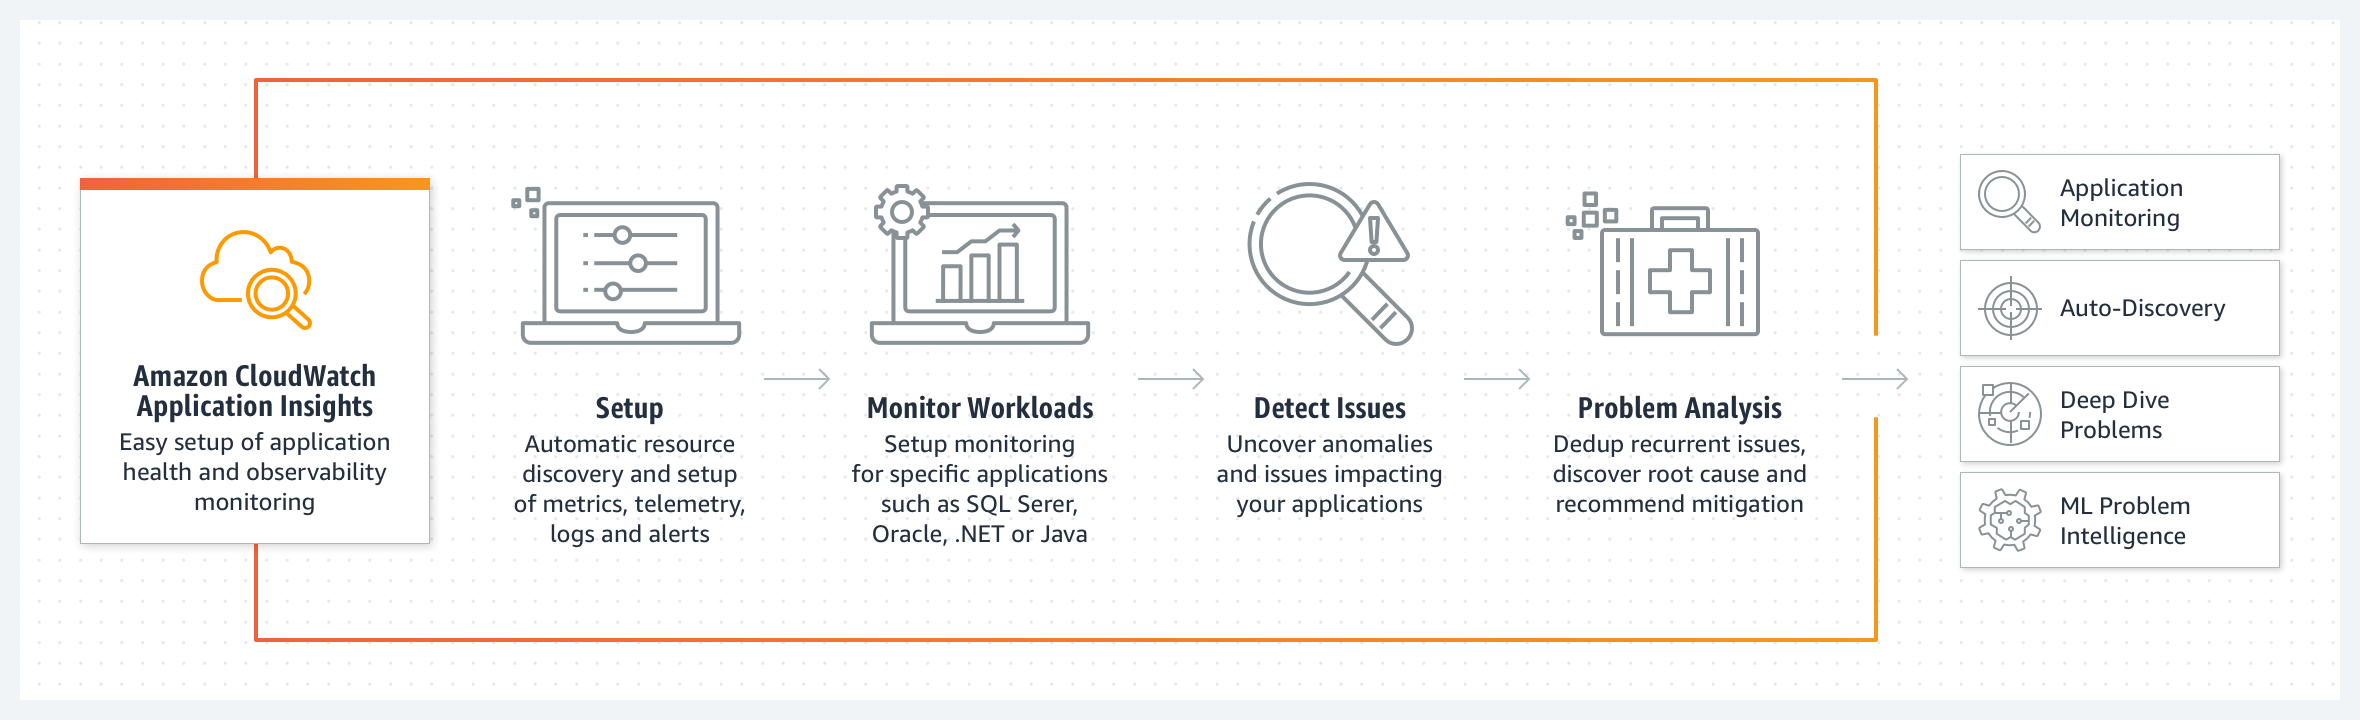 How Amazon CloudWatch Application Insights works